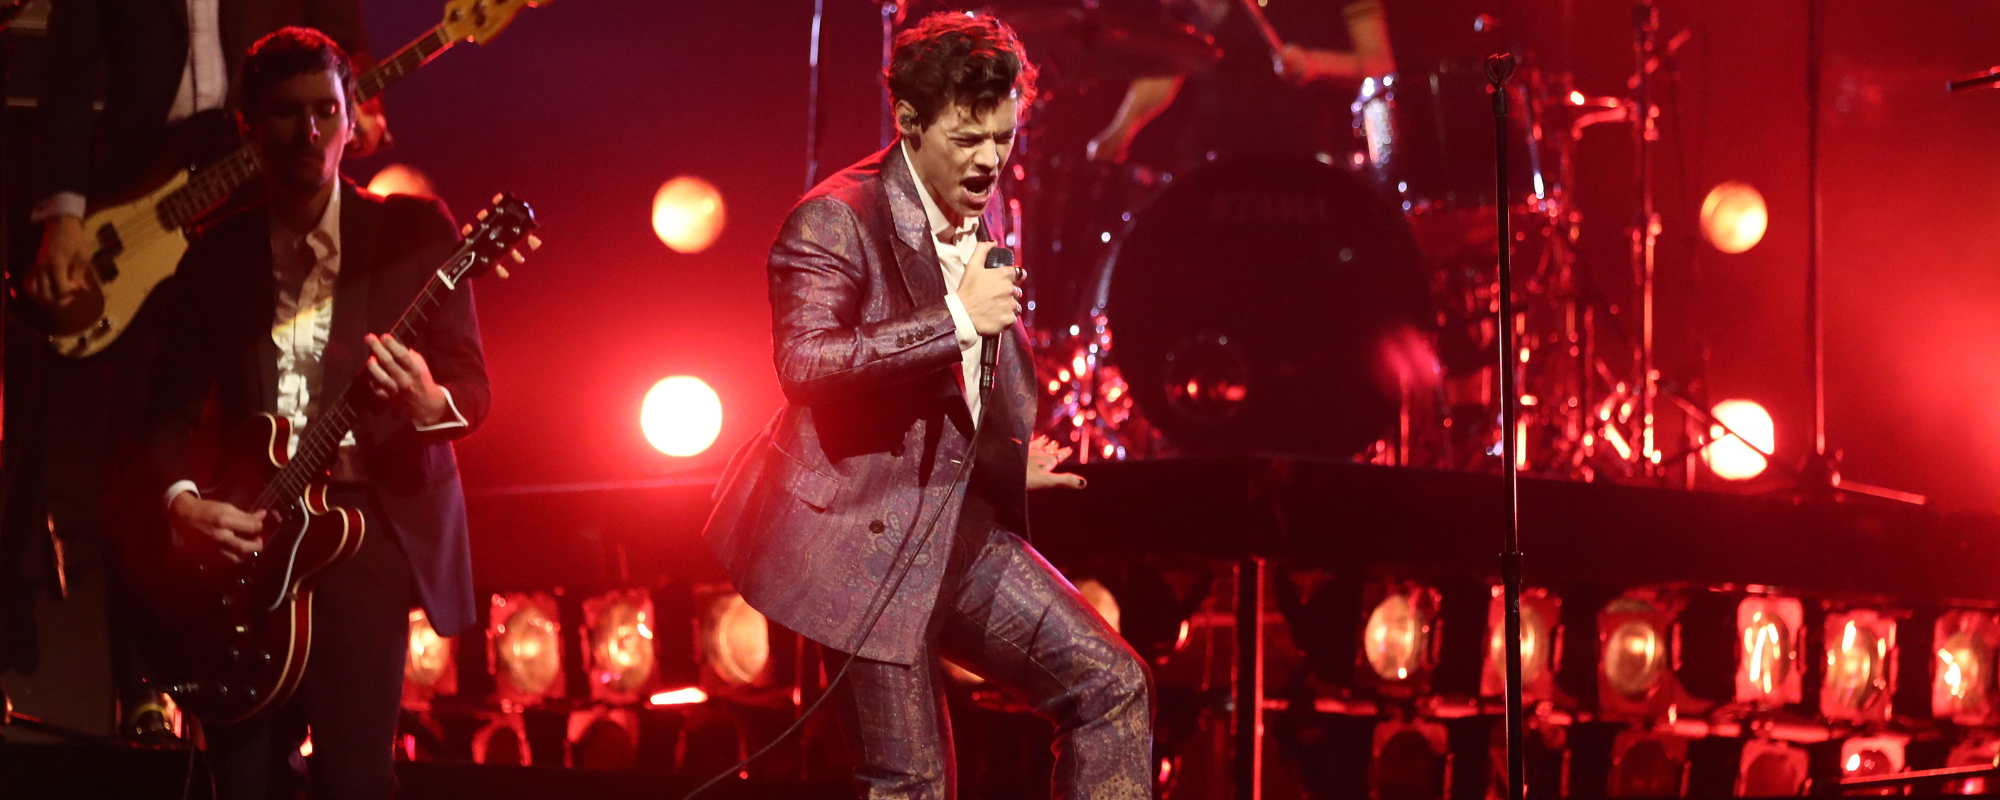 Remember When: Harry Styles Kicked Off His Solo Career With an Intimate Theater Tour